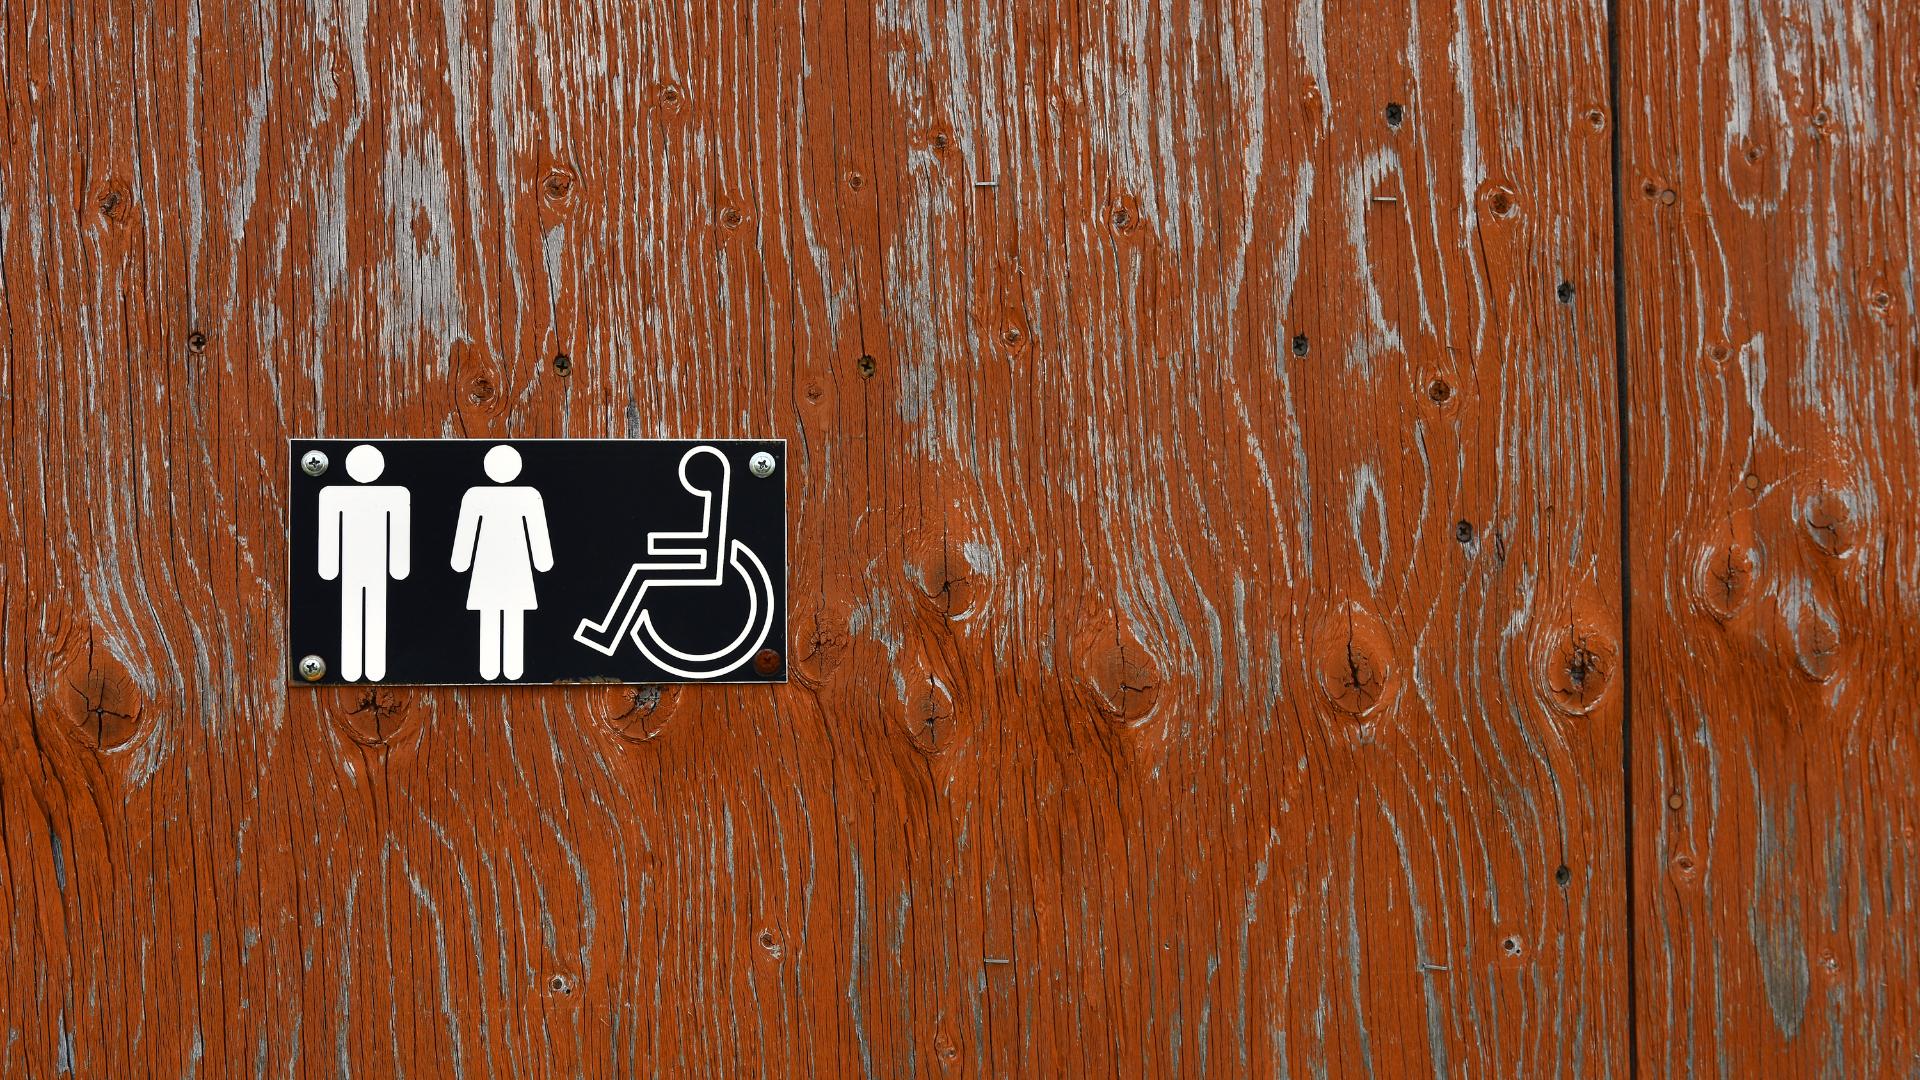 bathroom sign that discloses accessibility for people with limited mobility